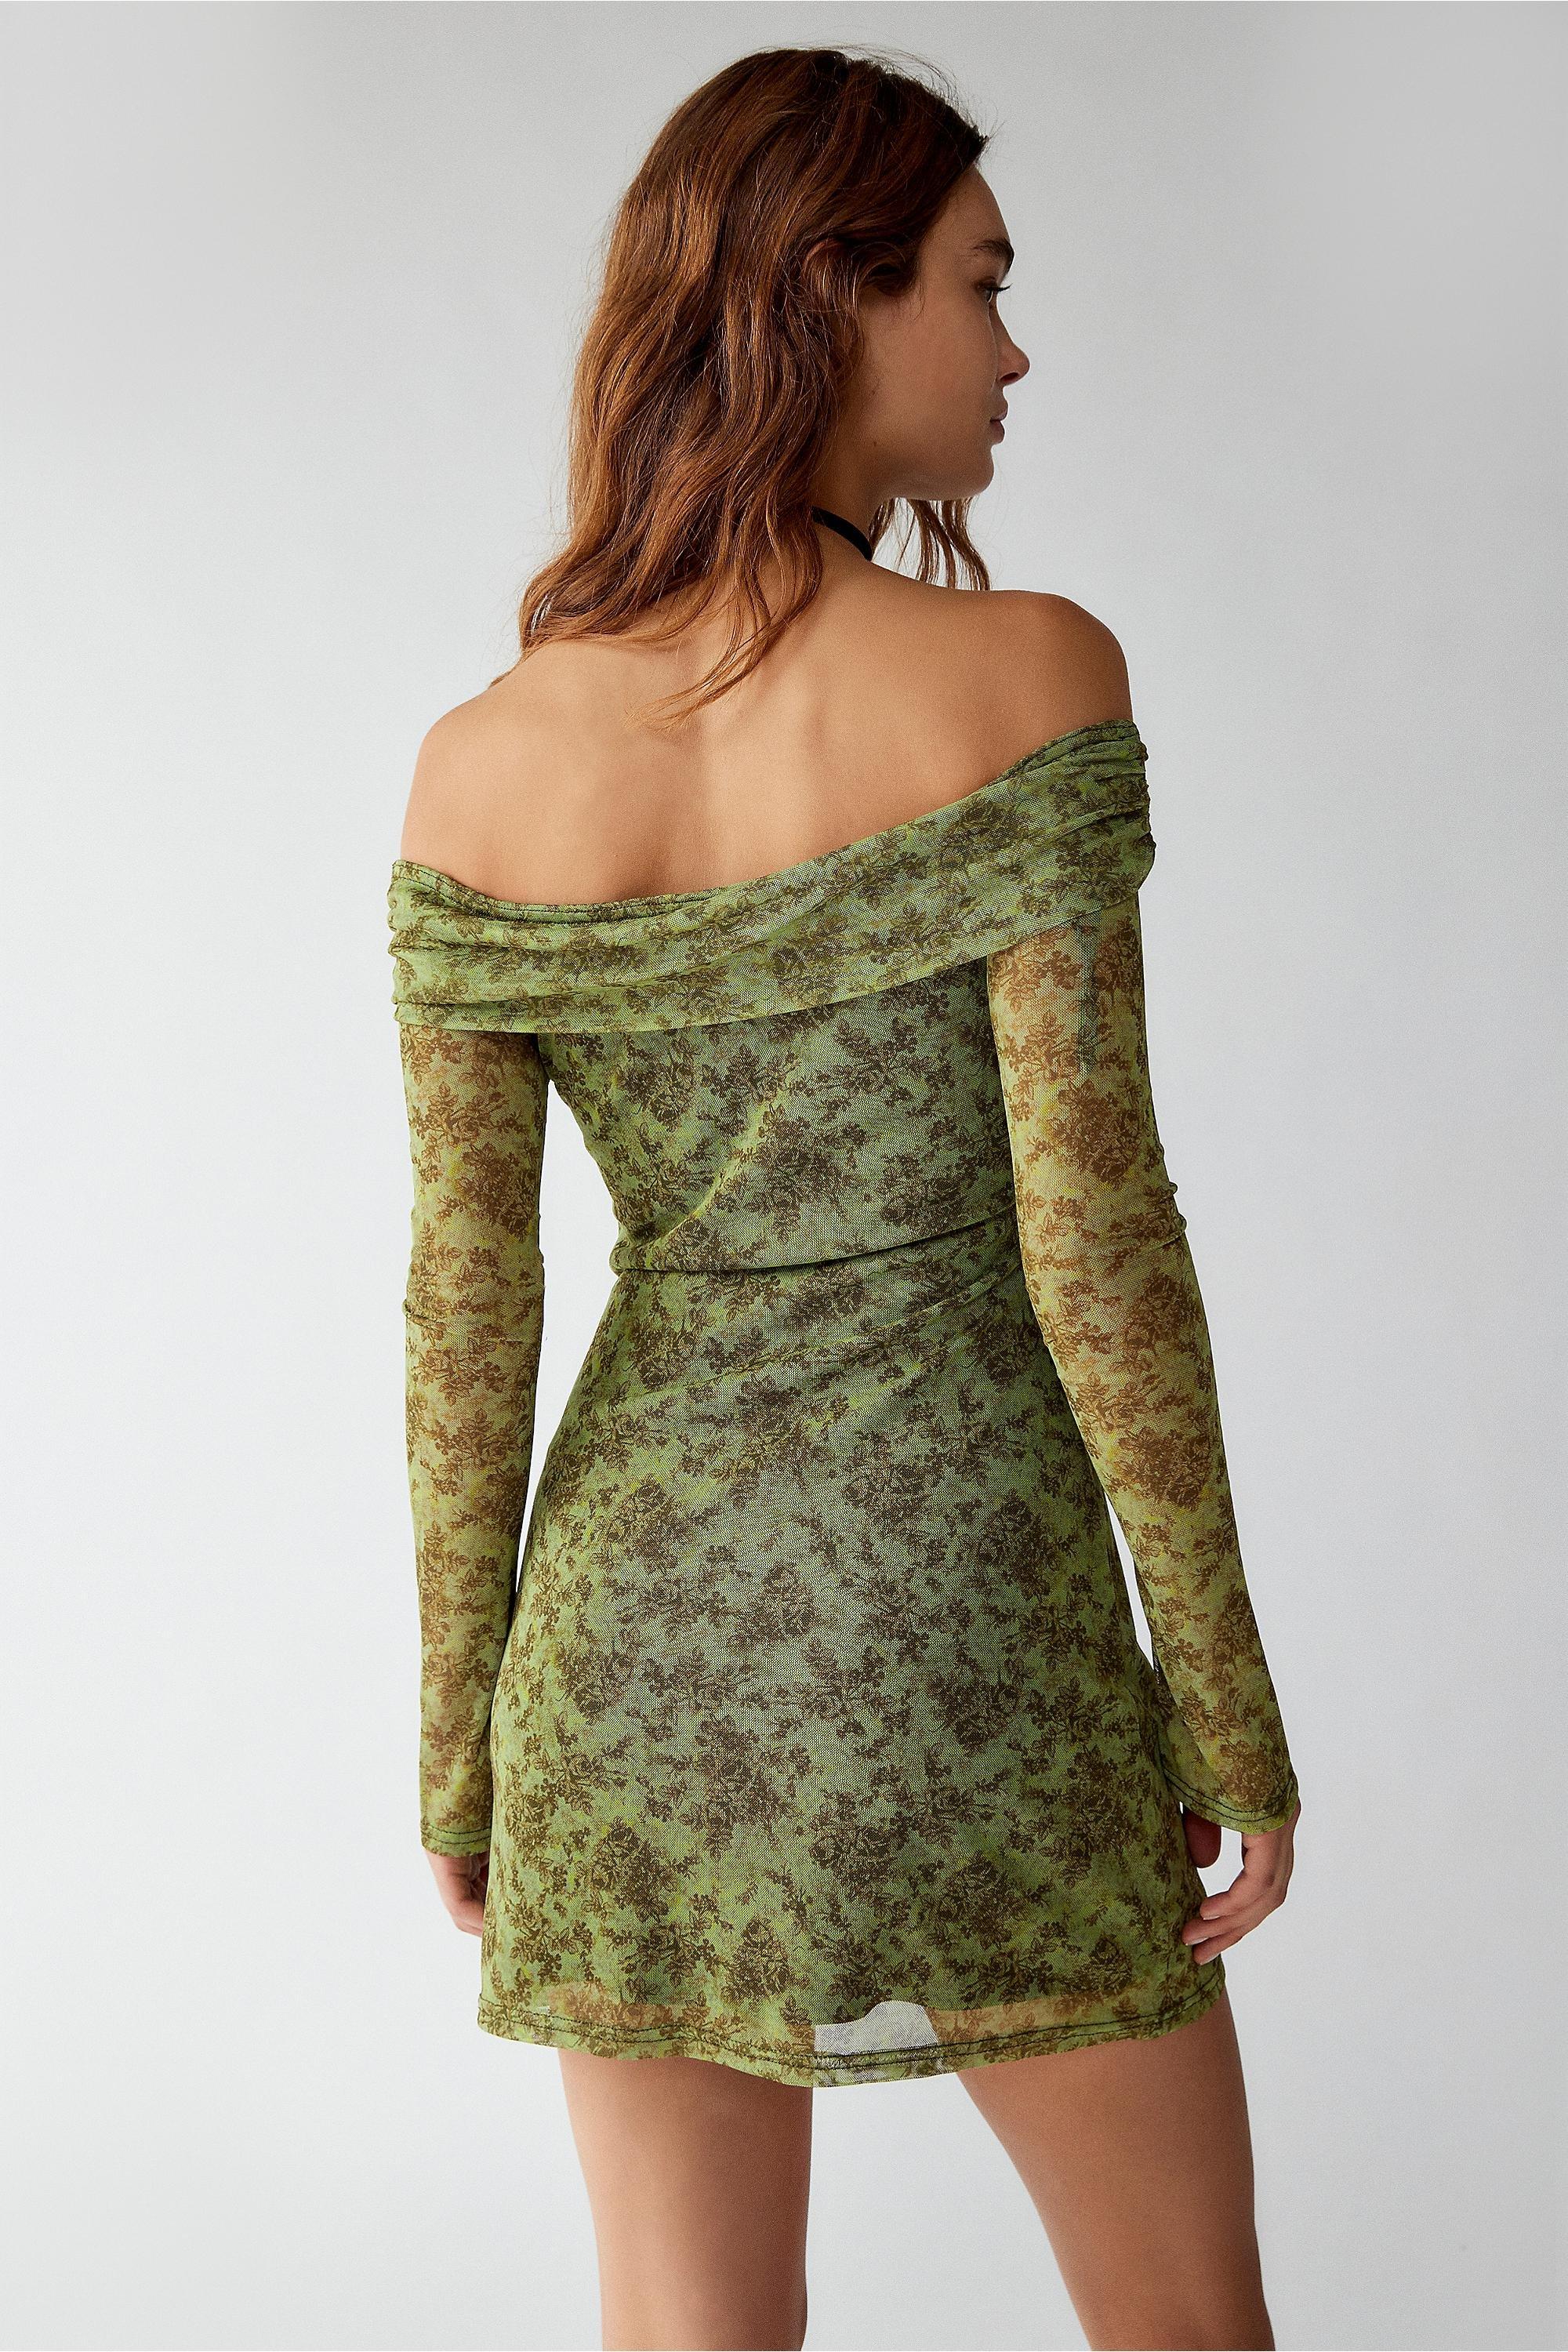 Urban Outfitters - Green Floral Off-The-Shoulder Mini Dress